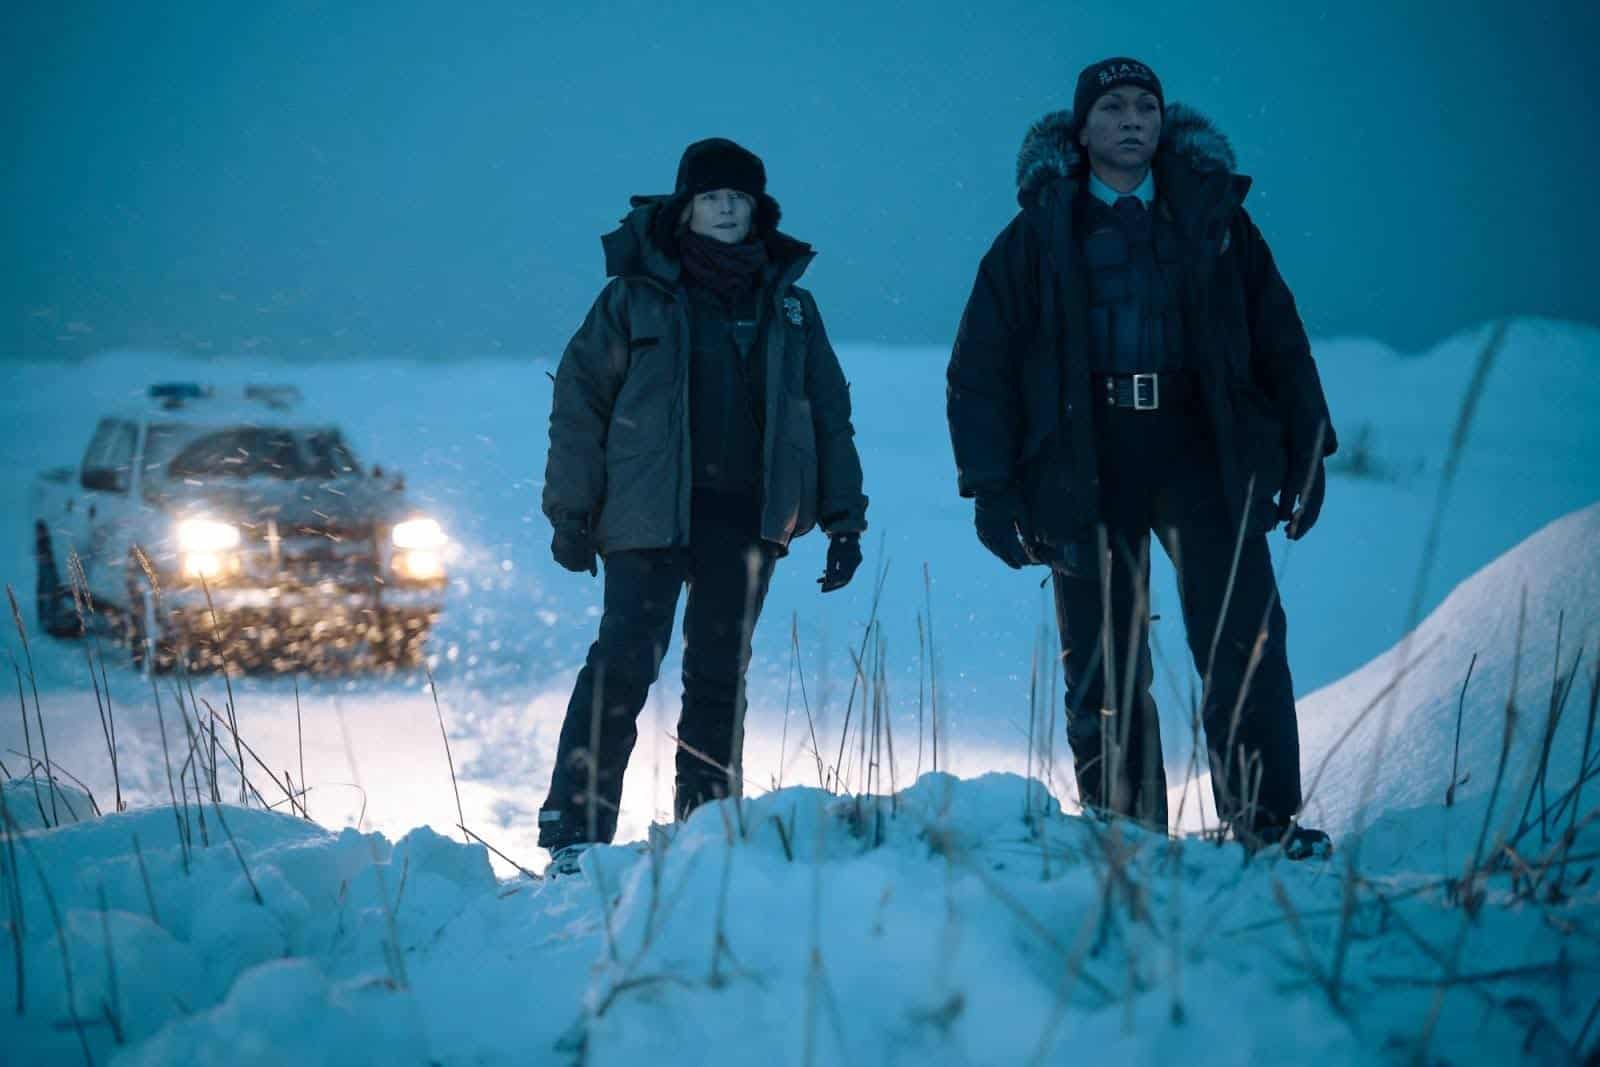 Two police women in parkas search a snowy field in this image from Anonymous Content.